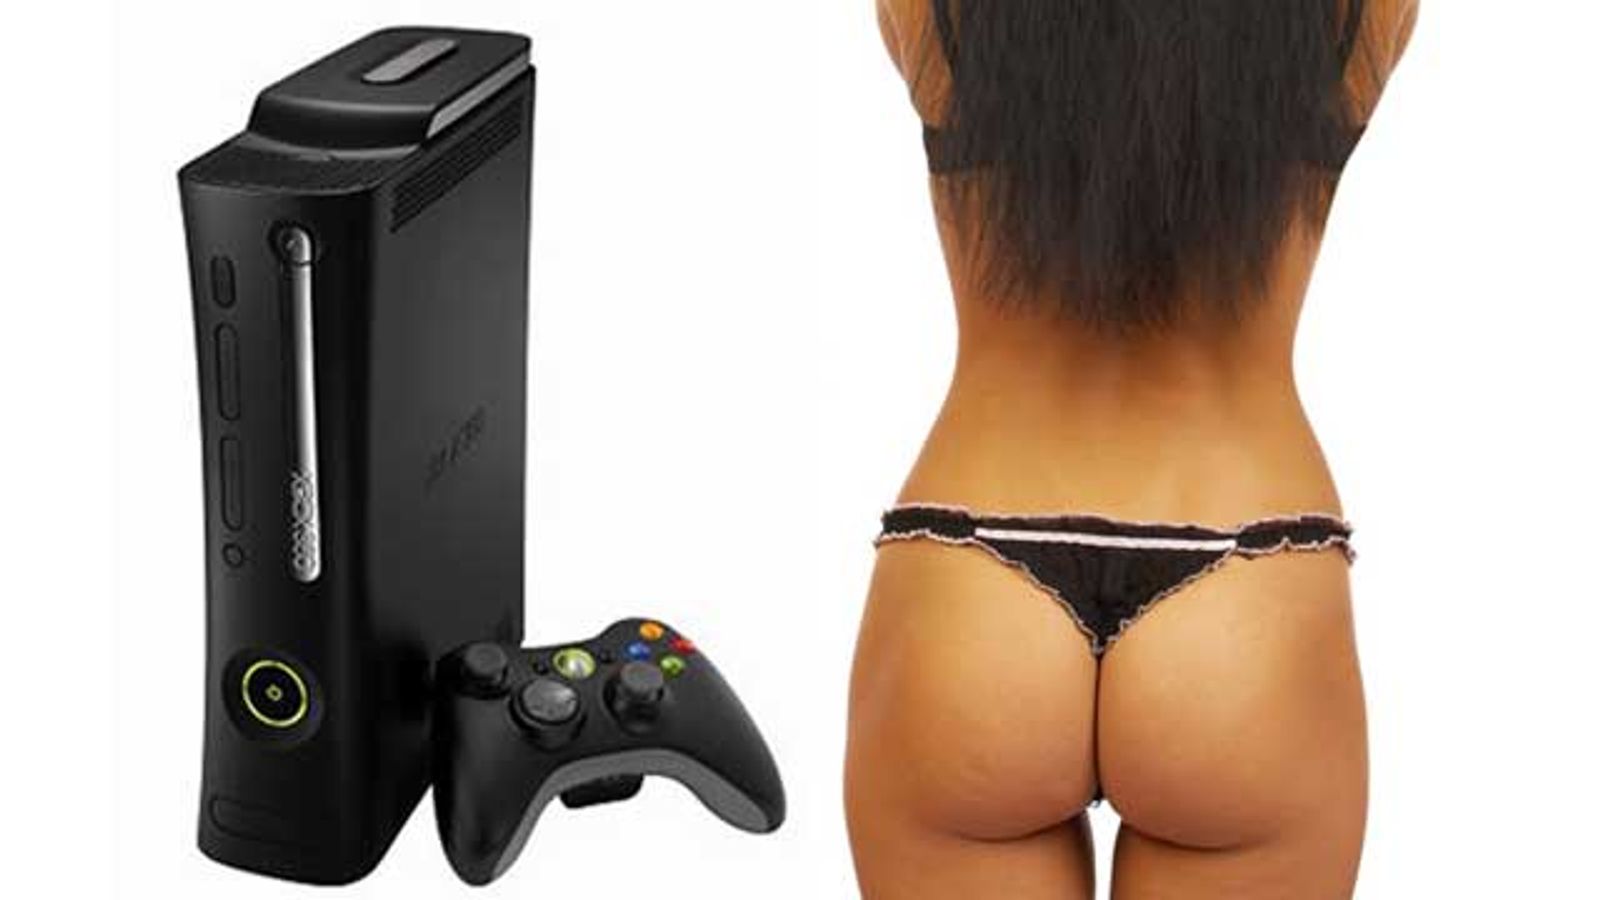 Microsoft Comments on Xbox 360 Porn